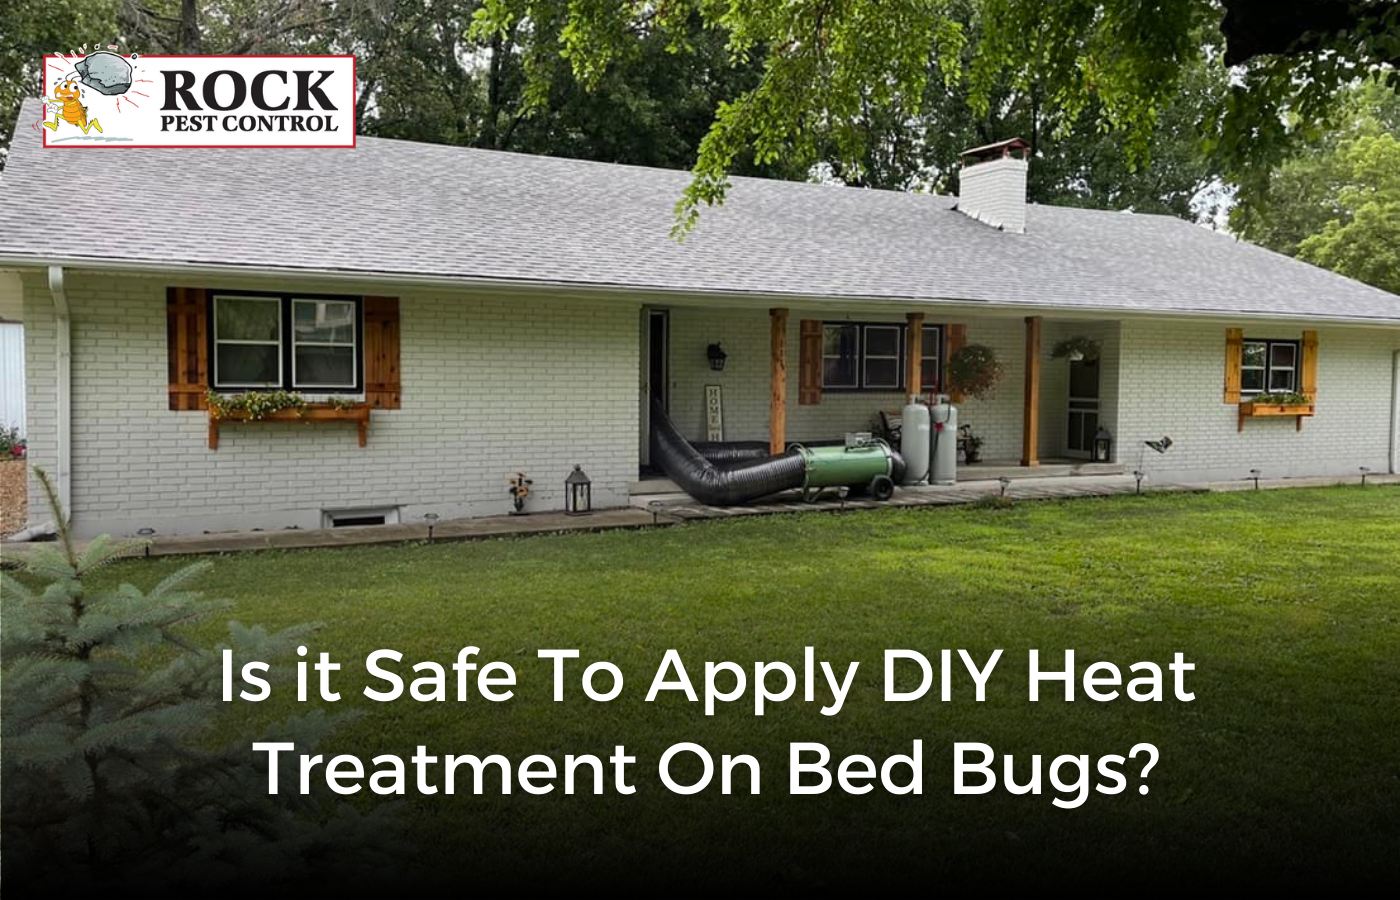 Is It Safe to Apply DIY Heat Treatment to Bed Bugs?